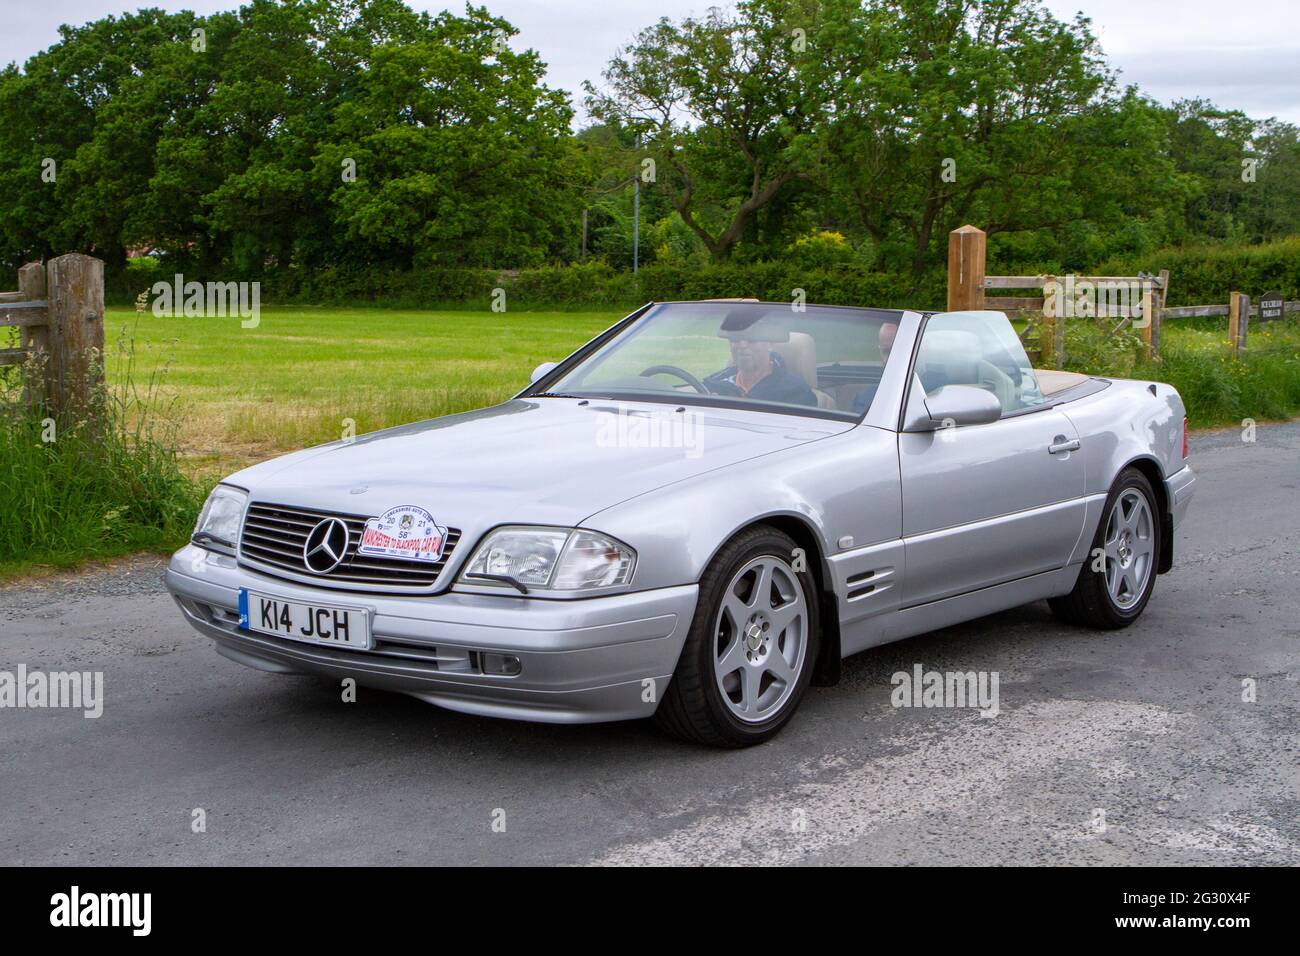 A silver Mercedes Sl320 Auto Silver Car Annual Manchester to Blackpool Vintage & Classic Car Run The event is a ‘Touring Assembly’ Stock Photo